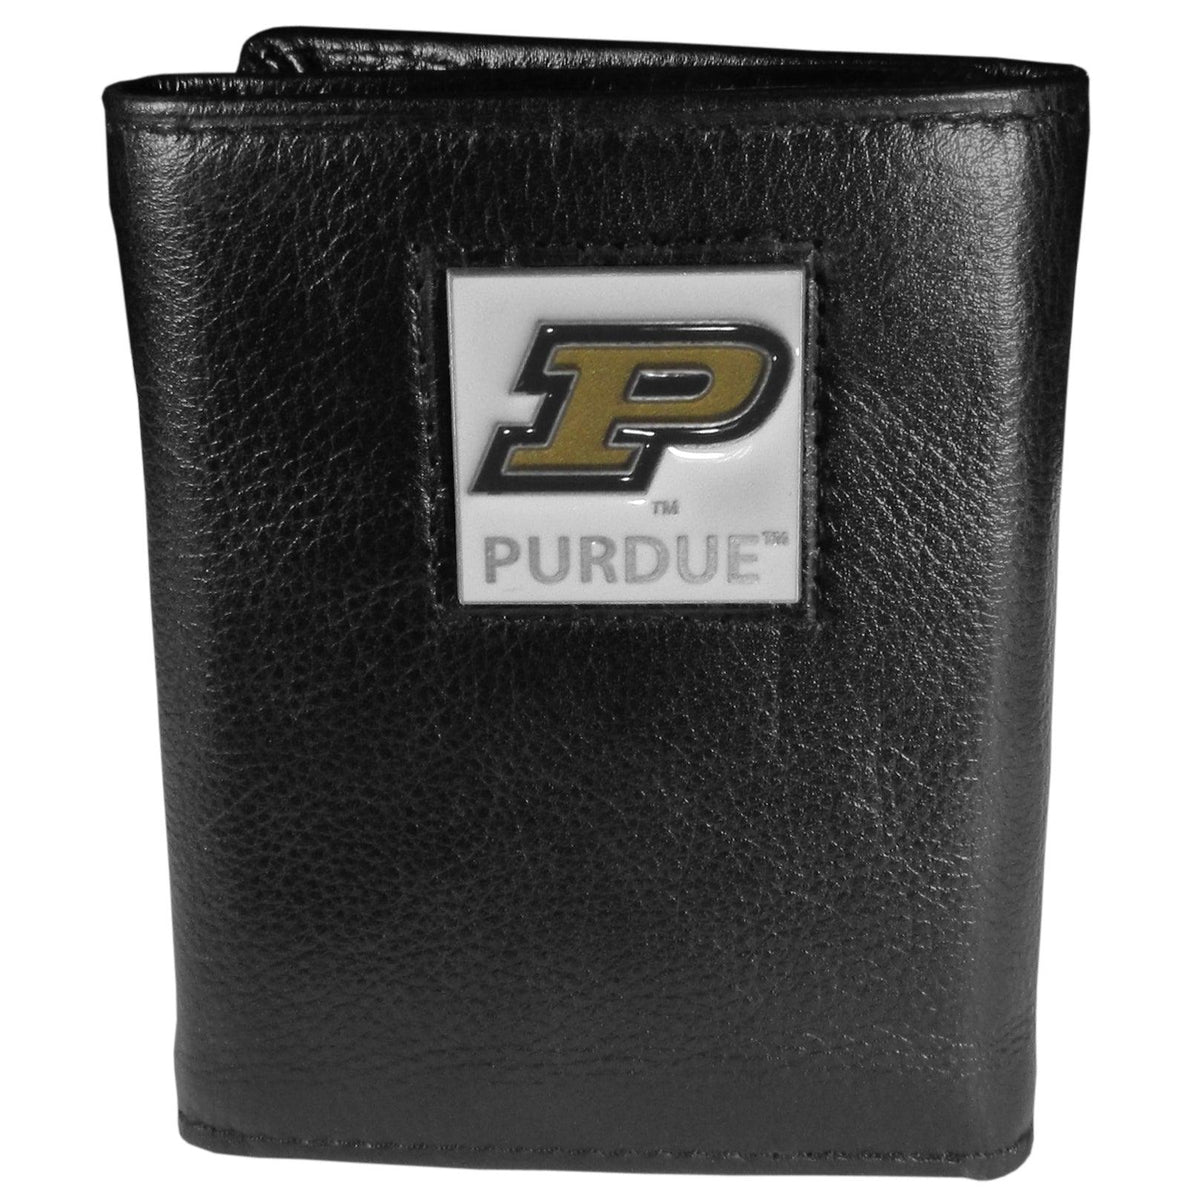 Purdue Boilermakers Deluxe Leather Tri-fold Wallet Packaged in Gift Box - Flyclothing LLC